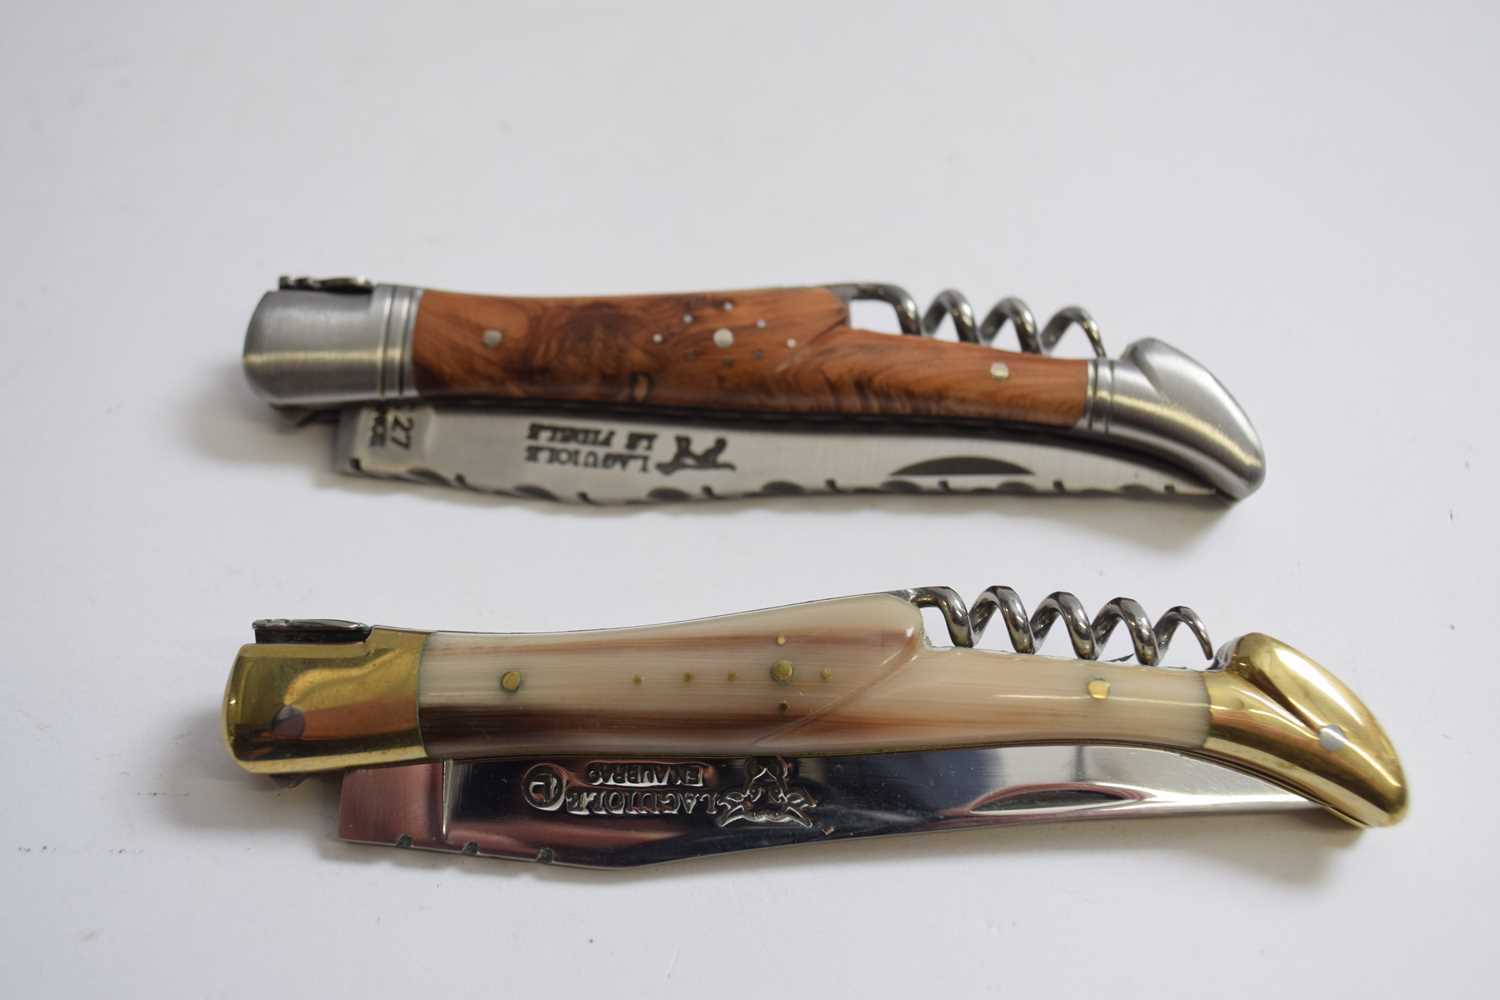 Bag containing two Laguiole penknives